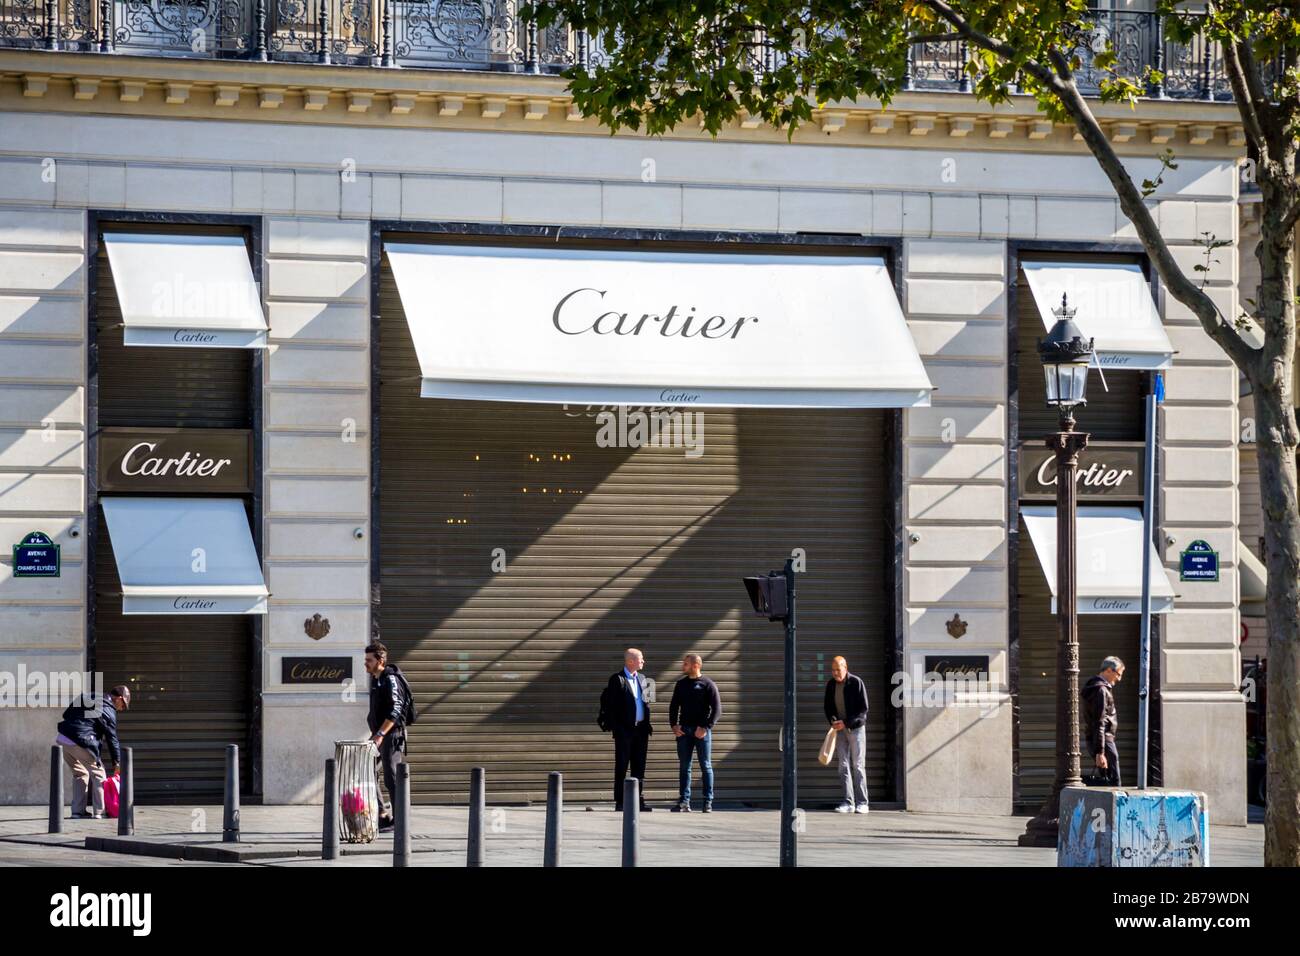 Paris/France - September 10, 2019 : The Cartier jewelry store on Champs- Elysees avenue Stock Photo - Alamy